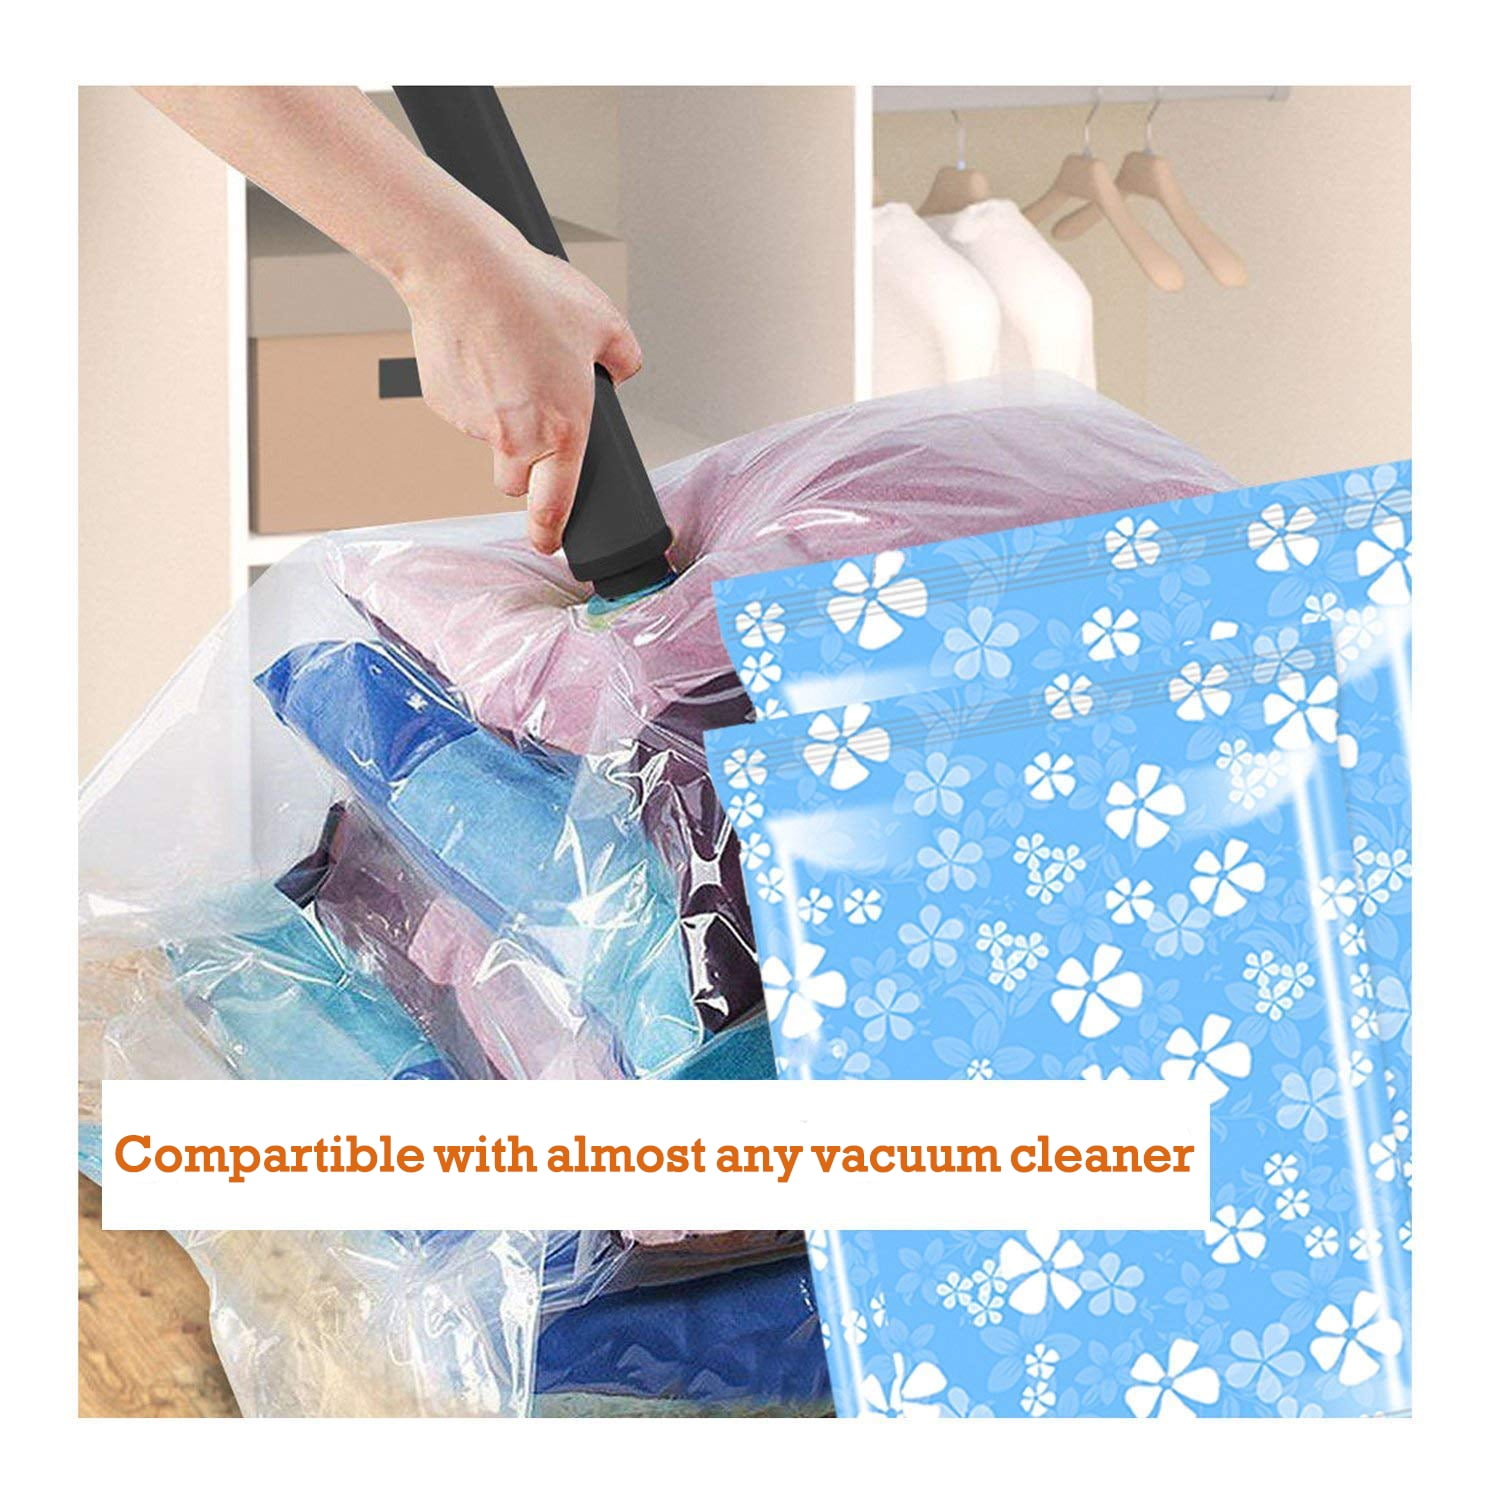  UPGOGO Vacuum Bags for Travel with Hand Pump,Vacuum Travel Bags  for Luggage,Vacuum Seal Bags for Clothing,Space Saver Vacuum Storage Bags,Travel  Essentials,Clothes,Blankets,Pillows (Combo 8 Pack) : Home & Kitchen